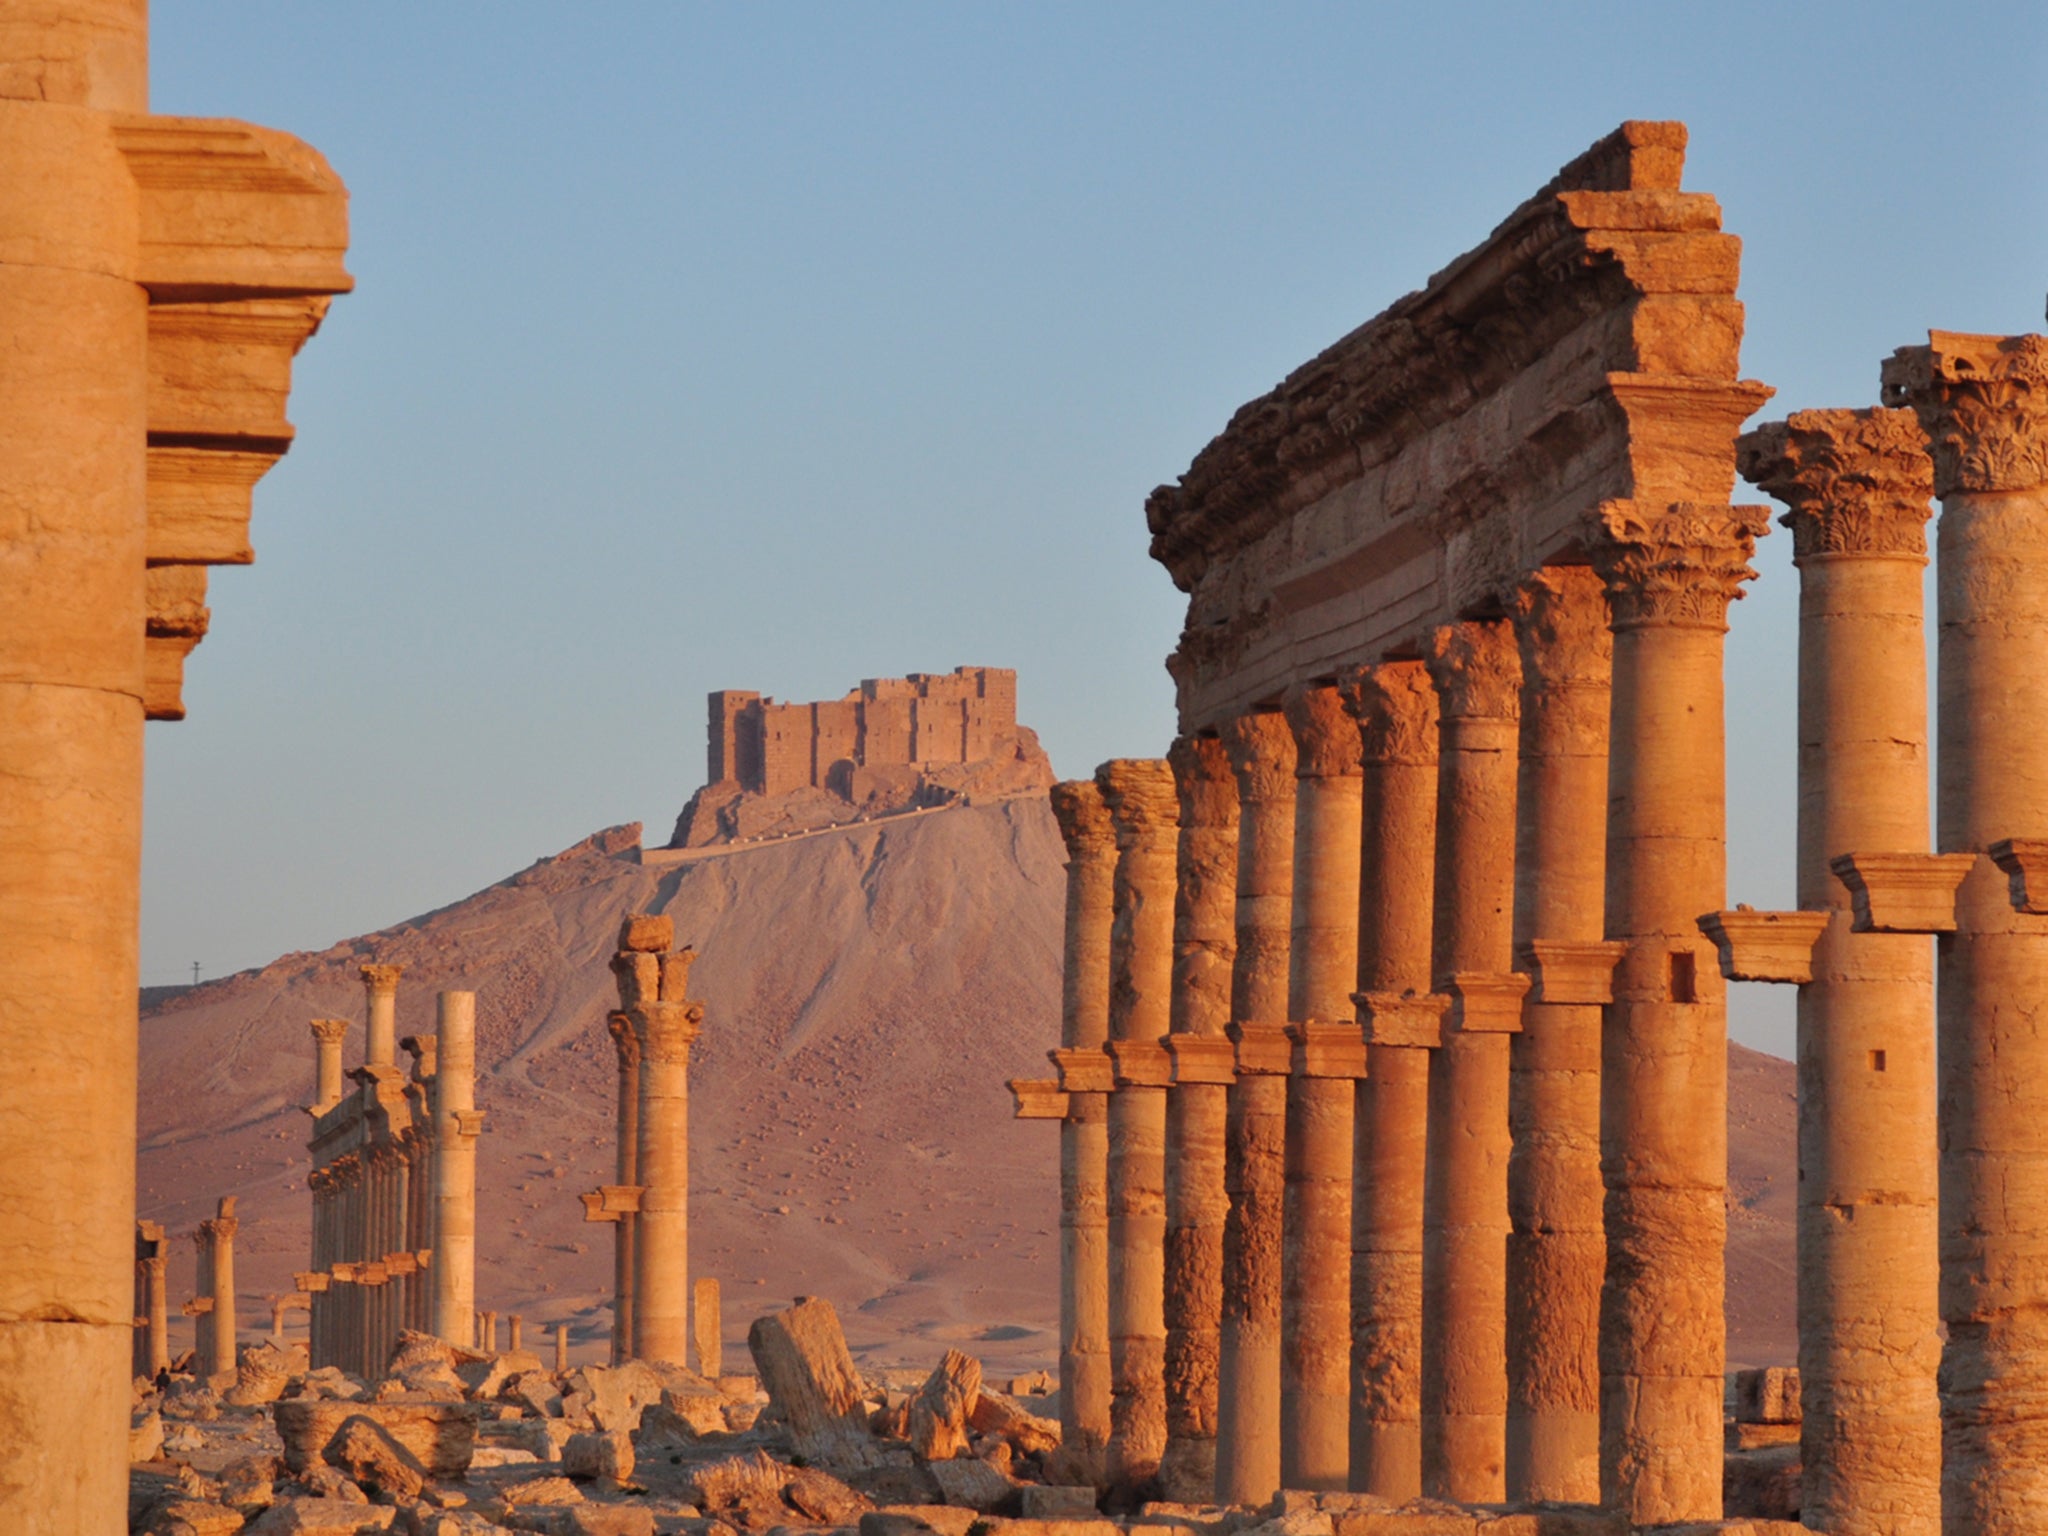 An ancient site hosting invaluable antiquities in the Syrian city of Palmyra, which was seized by Isis earlier this year